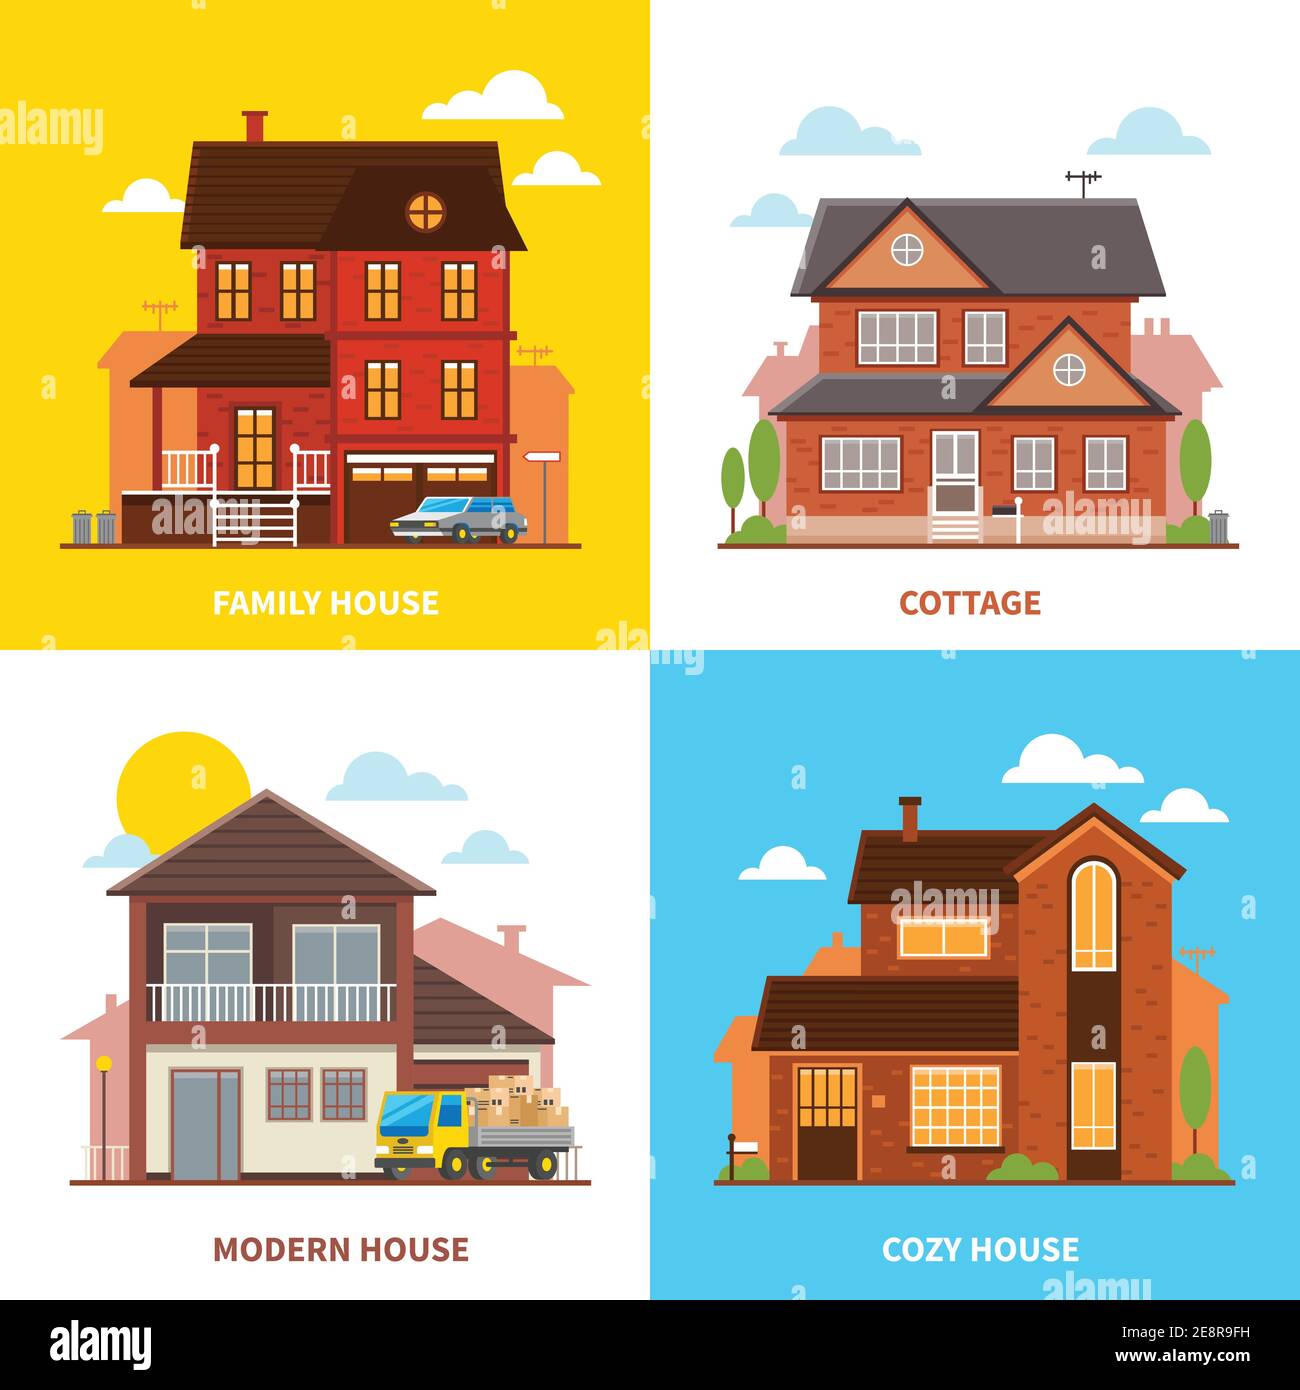 Cottage buildings 2x2 design concept set of modern cozy family houses flat vector illustration Stock Vector